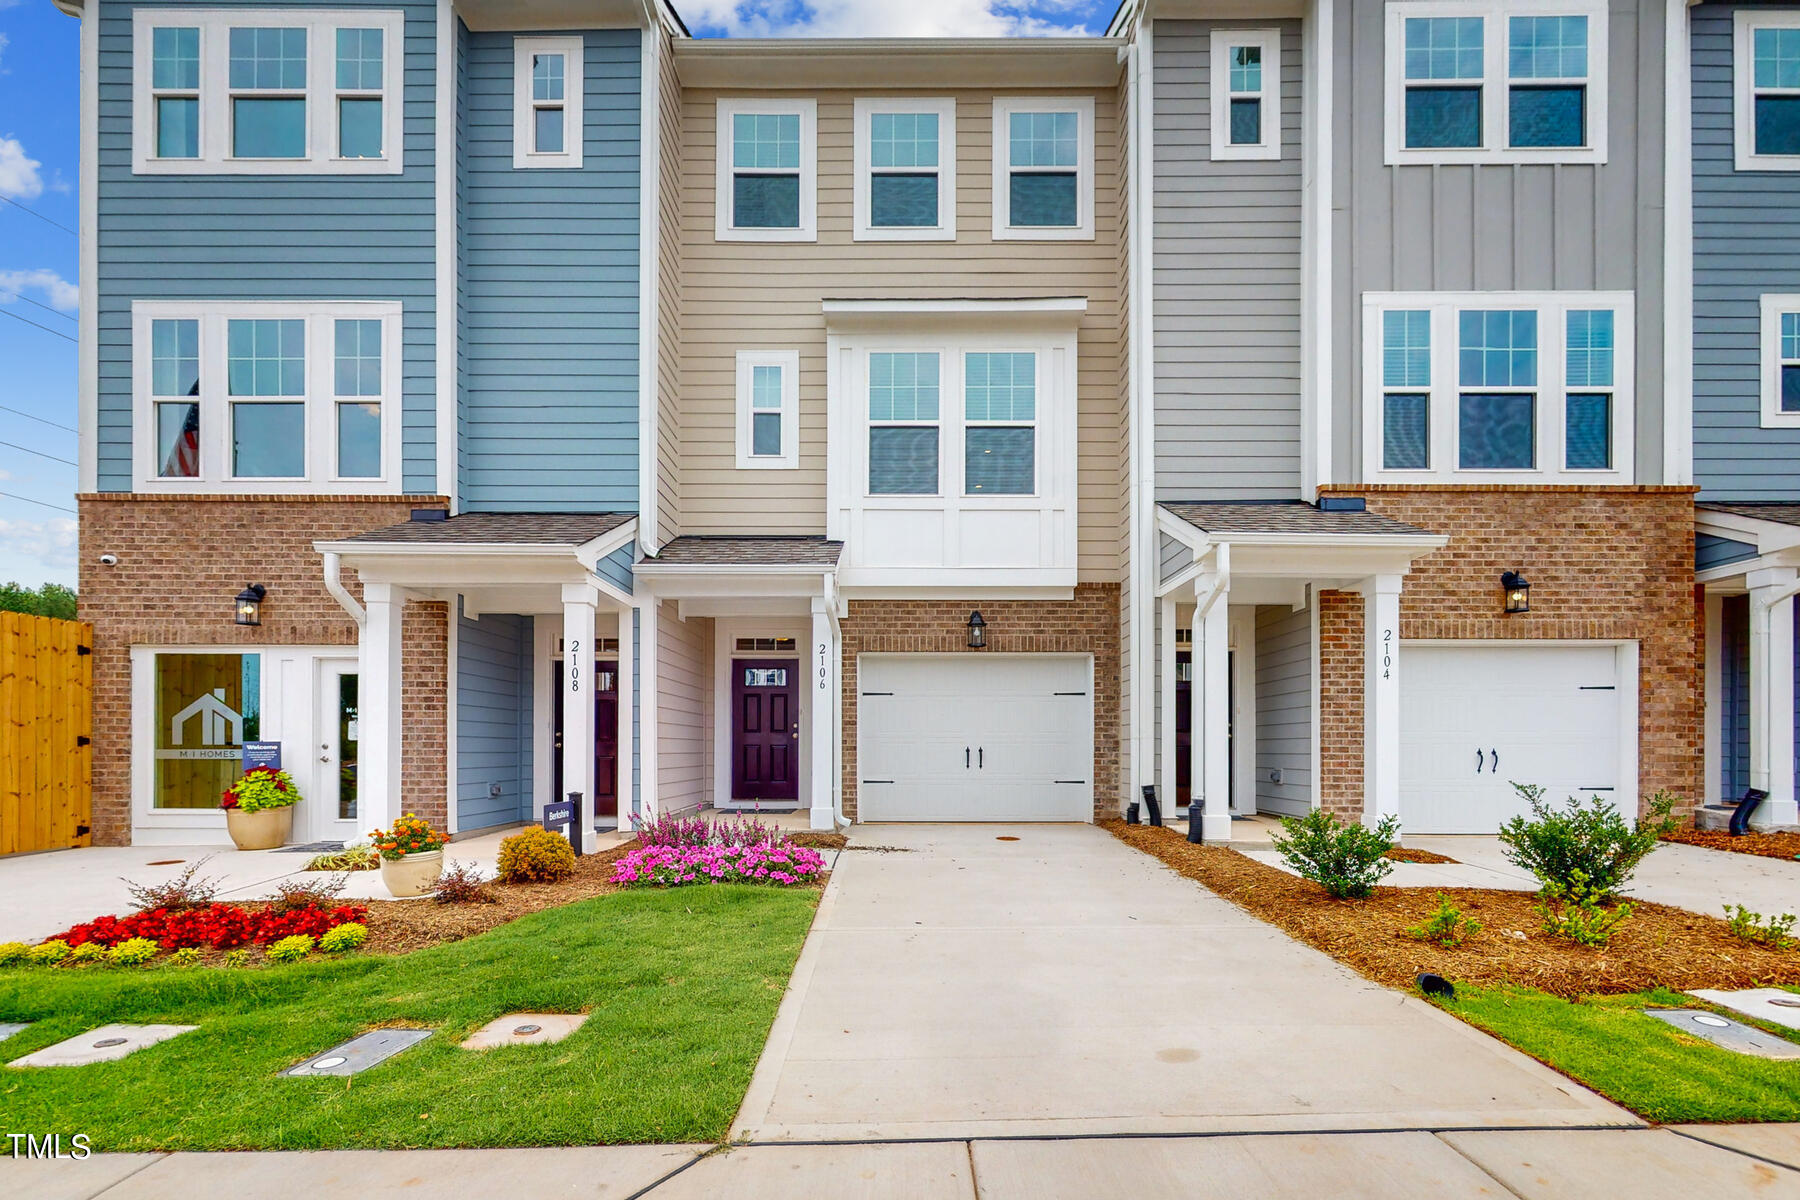 View Durham, NC 27703 townhome